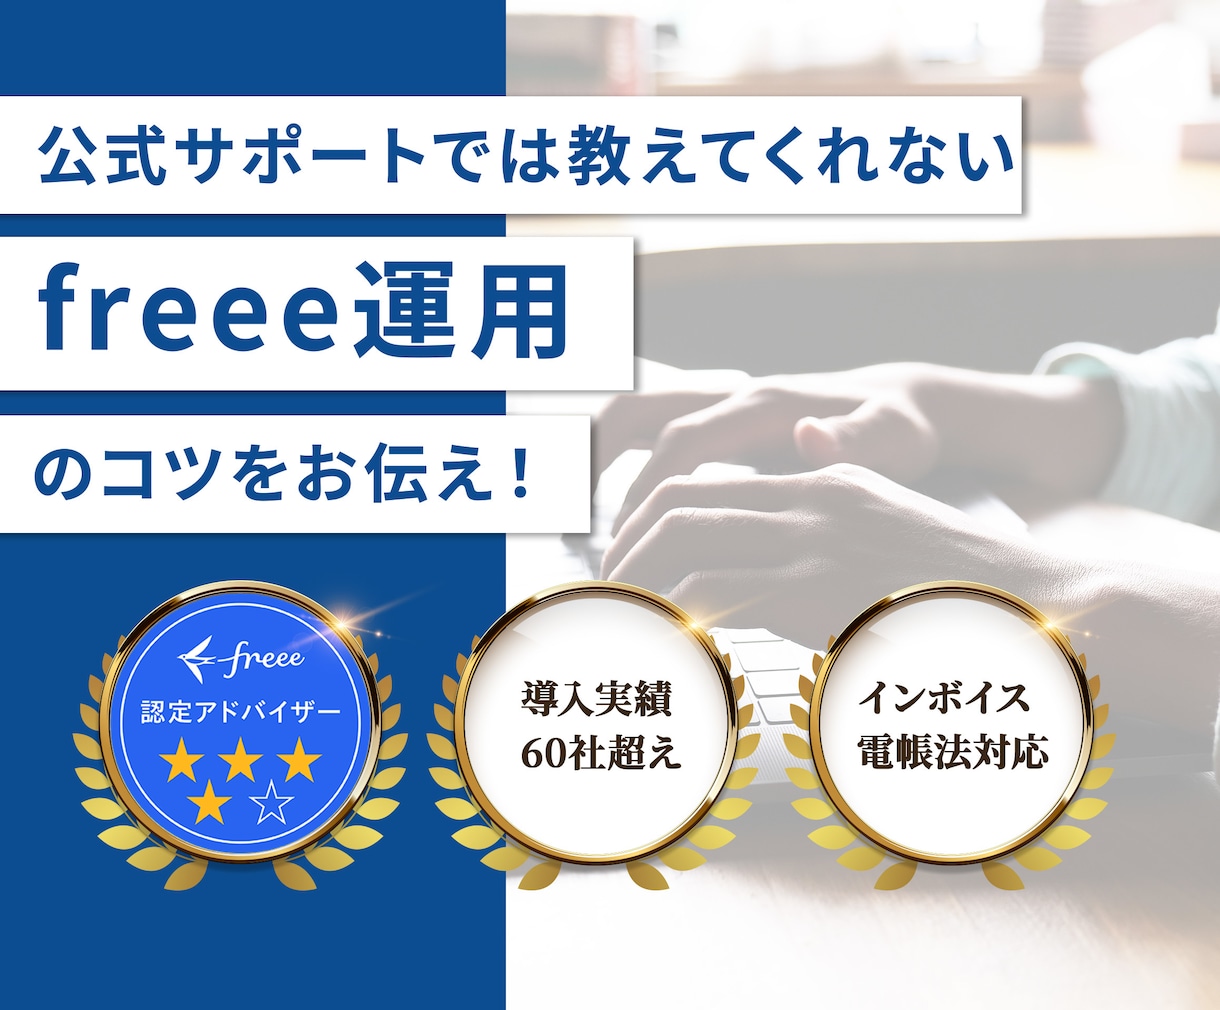 💬Coconala｜We will solve all your worries about freee Takuya Ota 5.0 (38) …